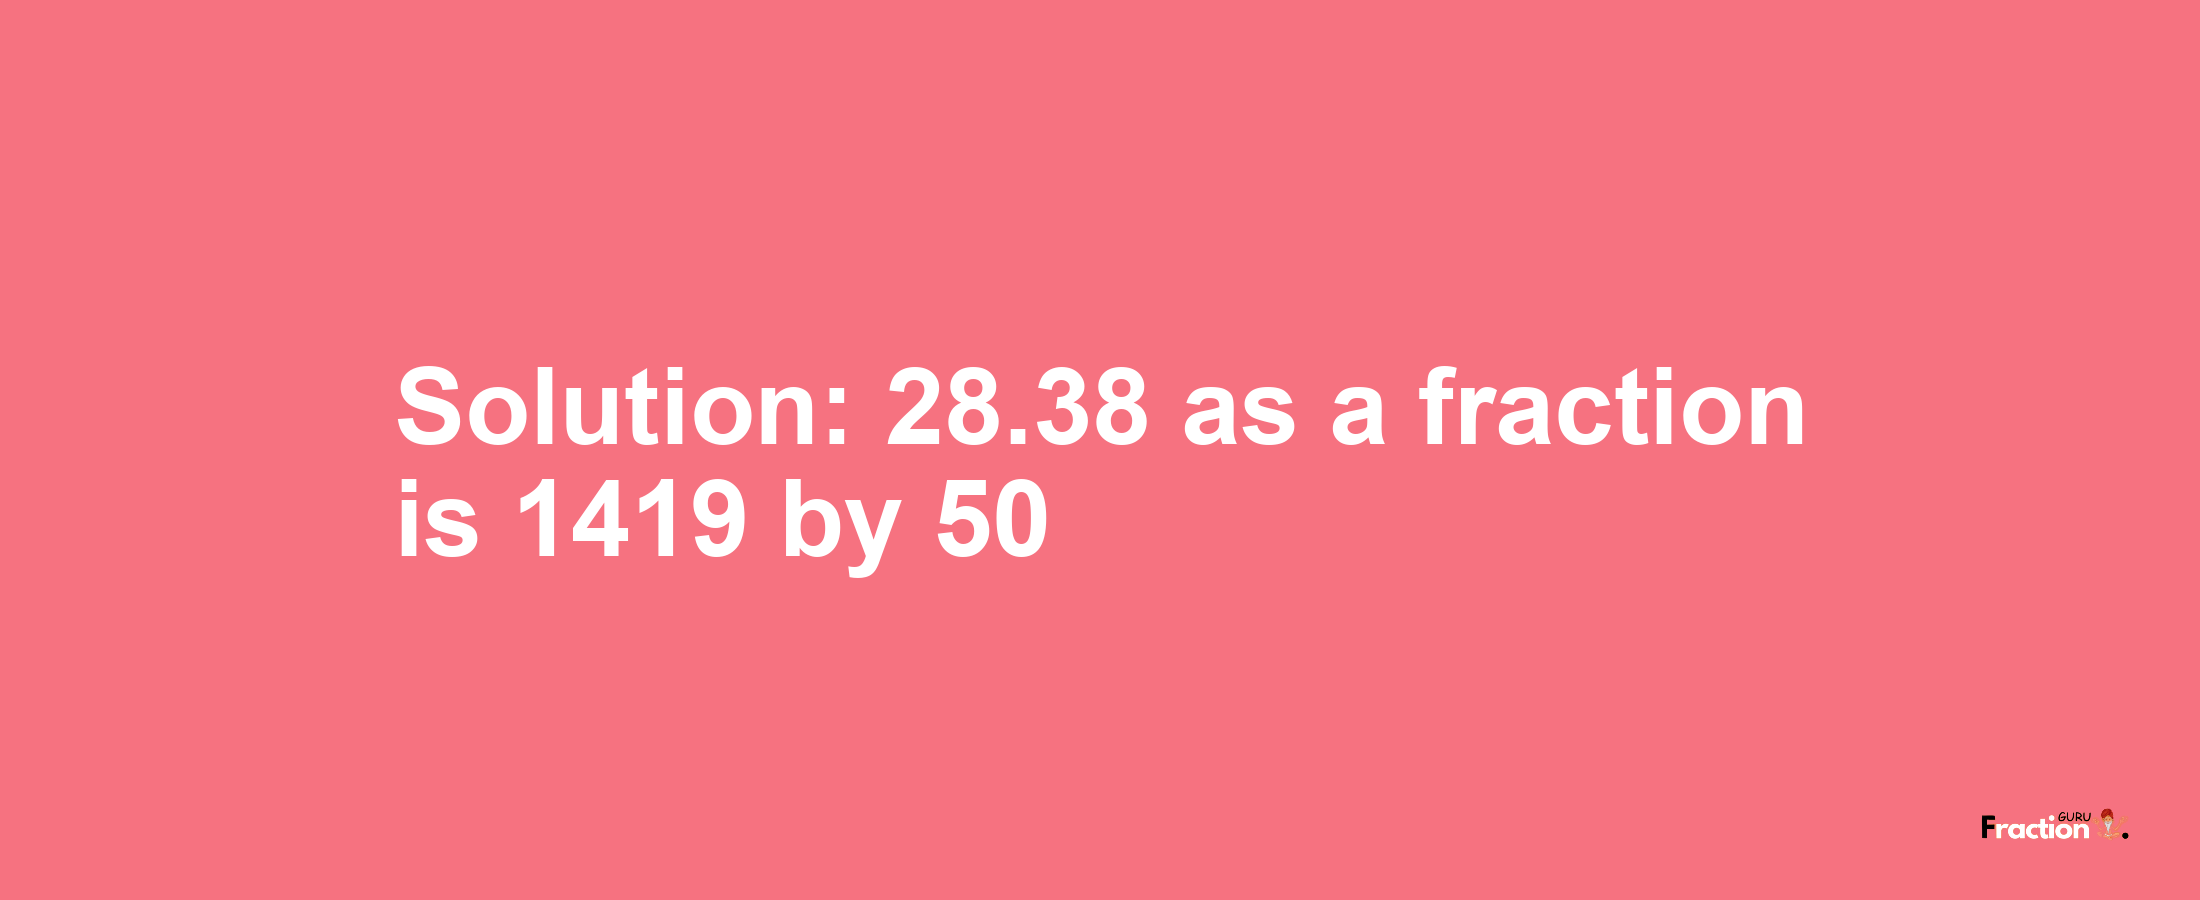 Solution:28.38 as a fraction is 1419/50